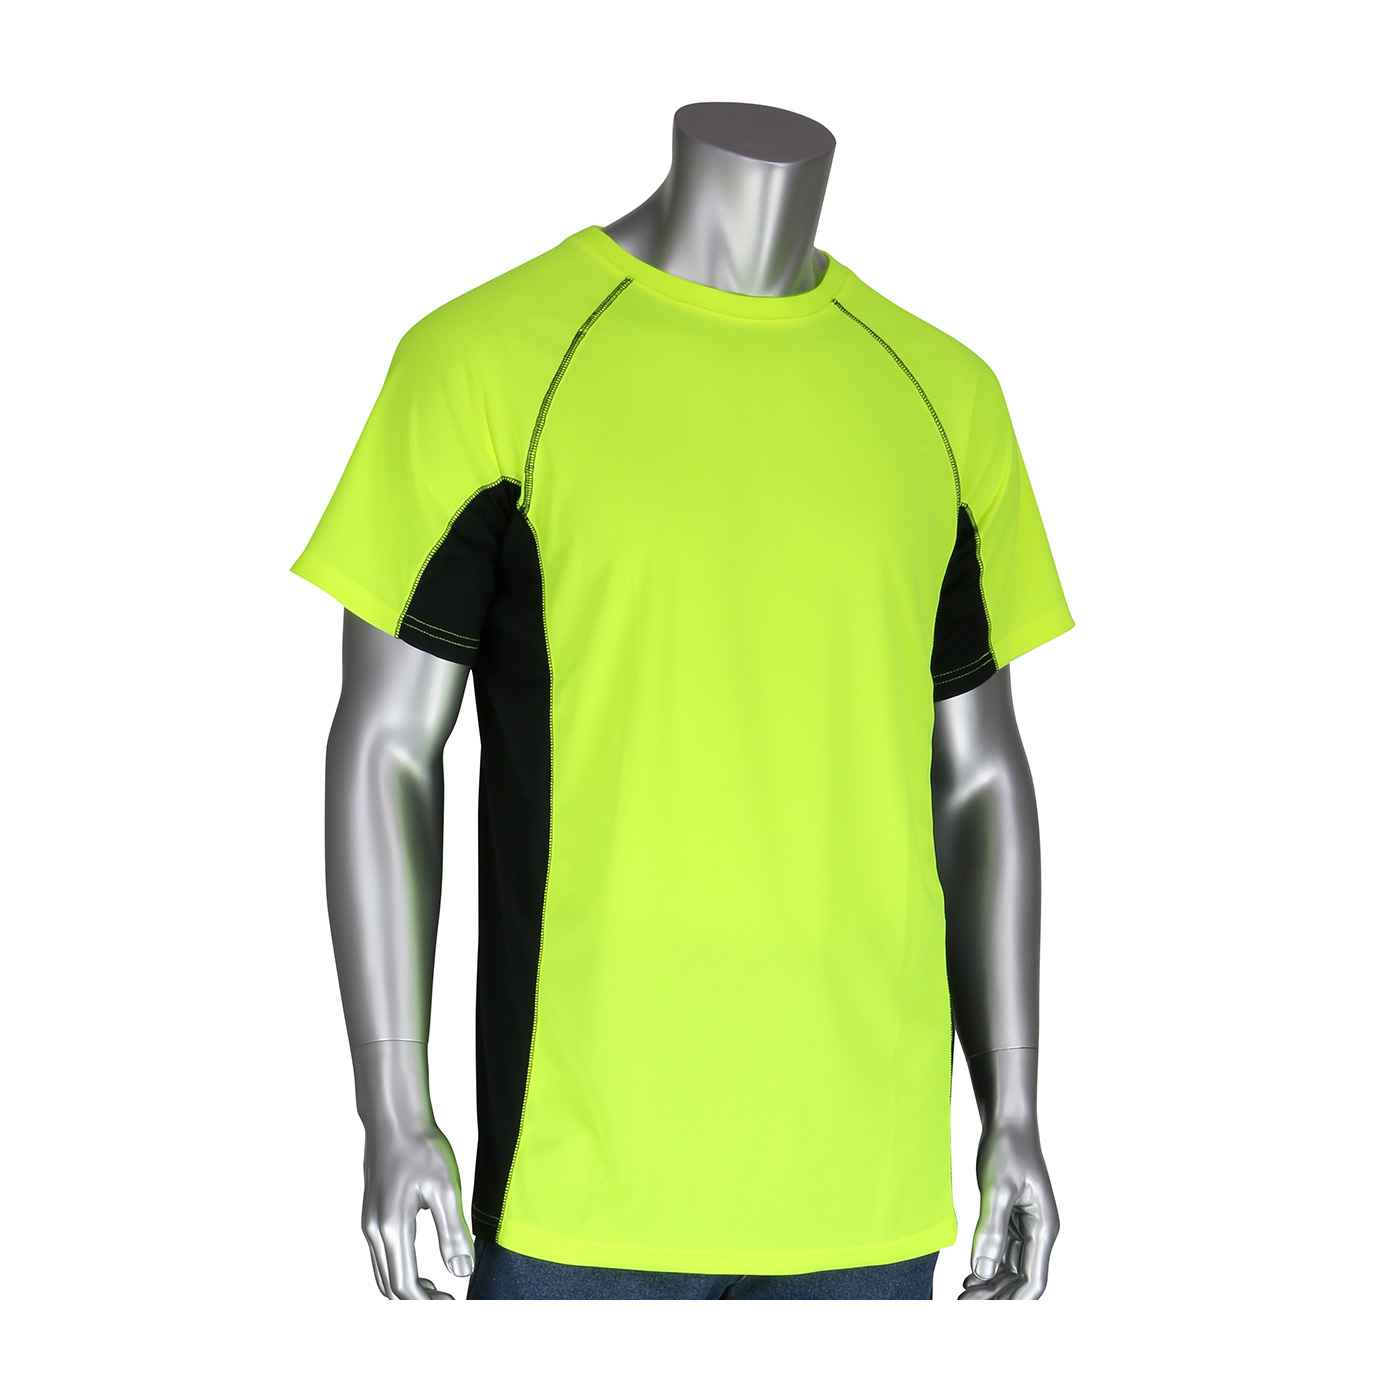 PIP® Non-ANSI Short Sleeve T-Shirt with 50+ UPF Sun Protection, Insect Repellent Treatment and Black Trim #310-950B